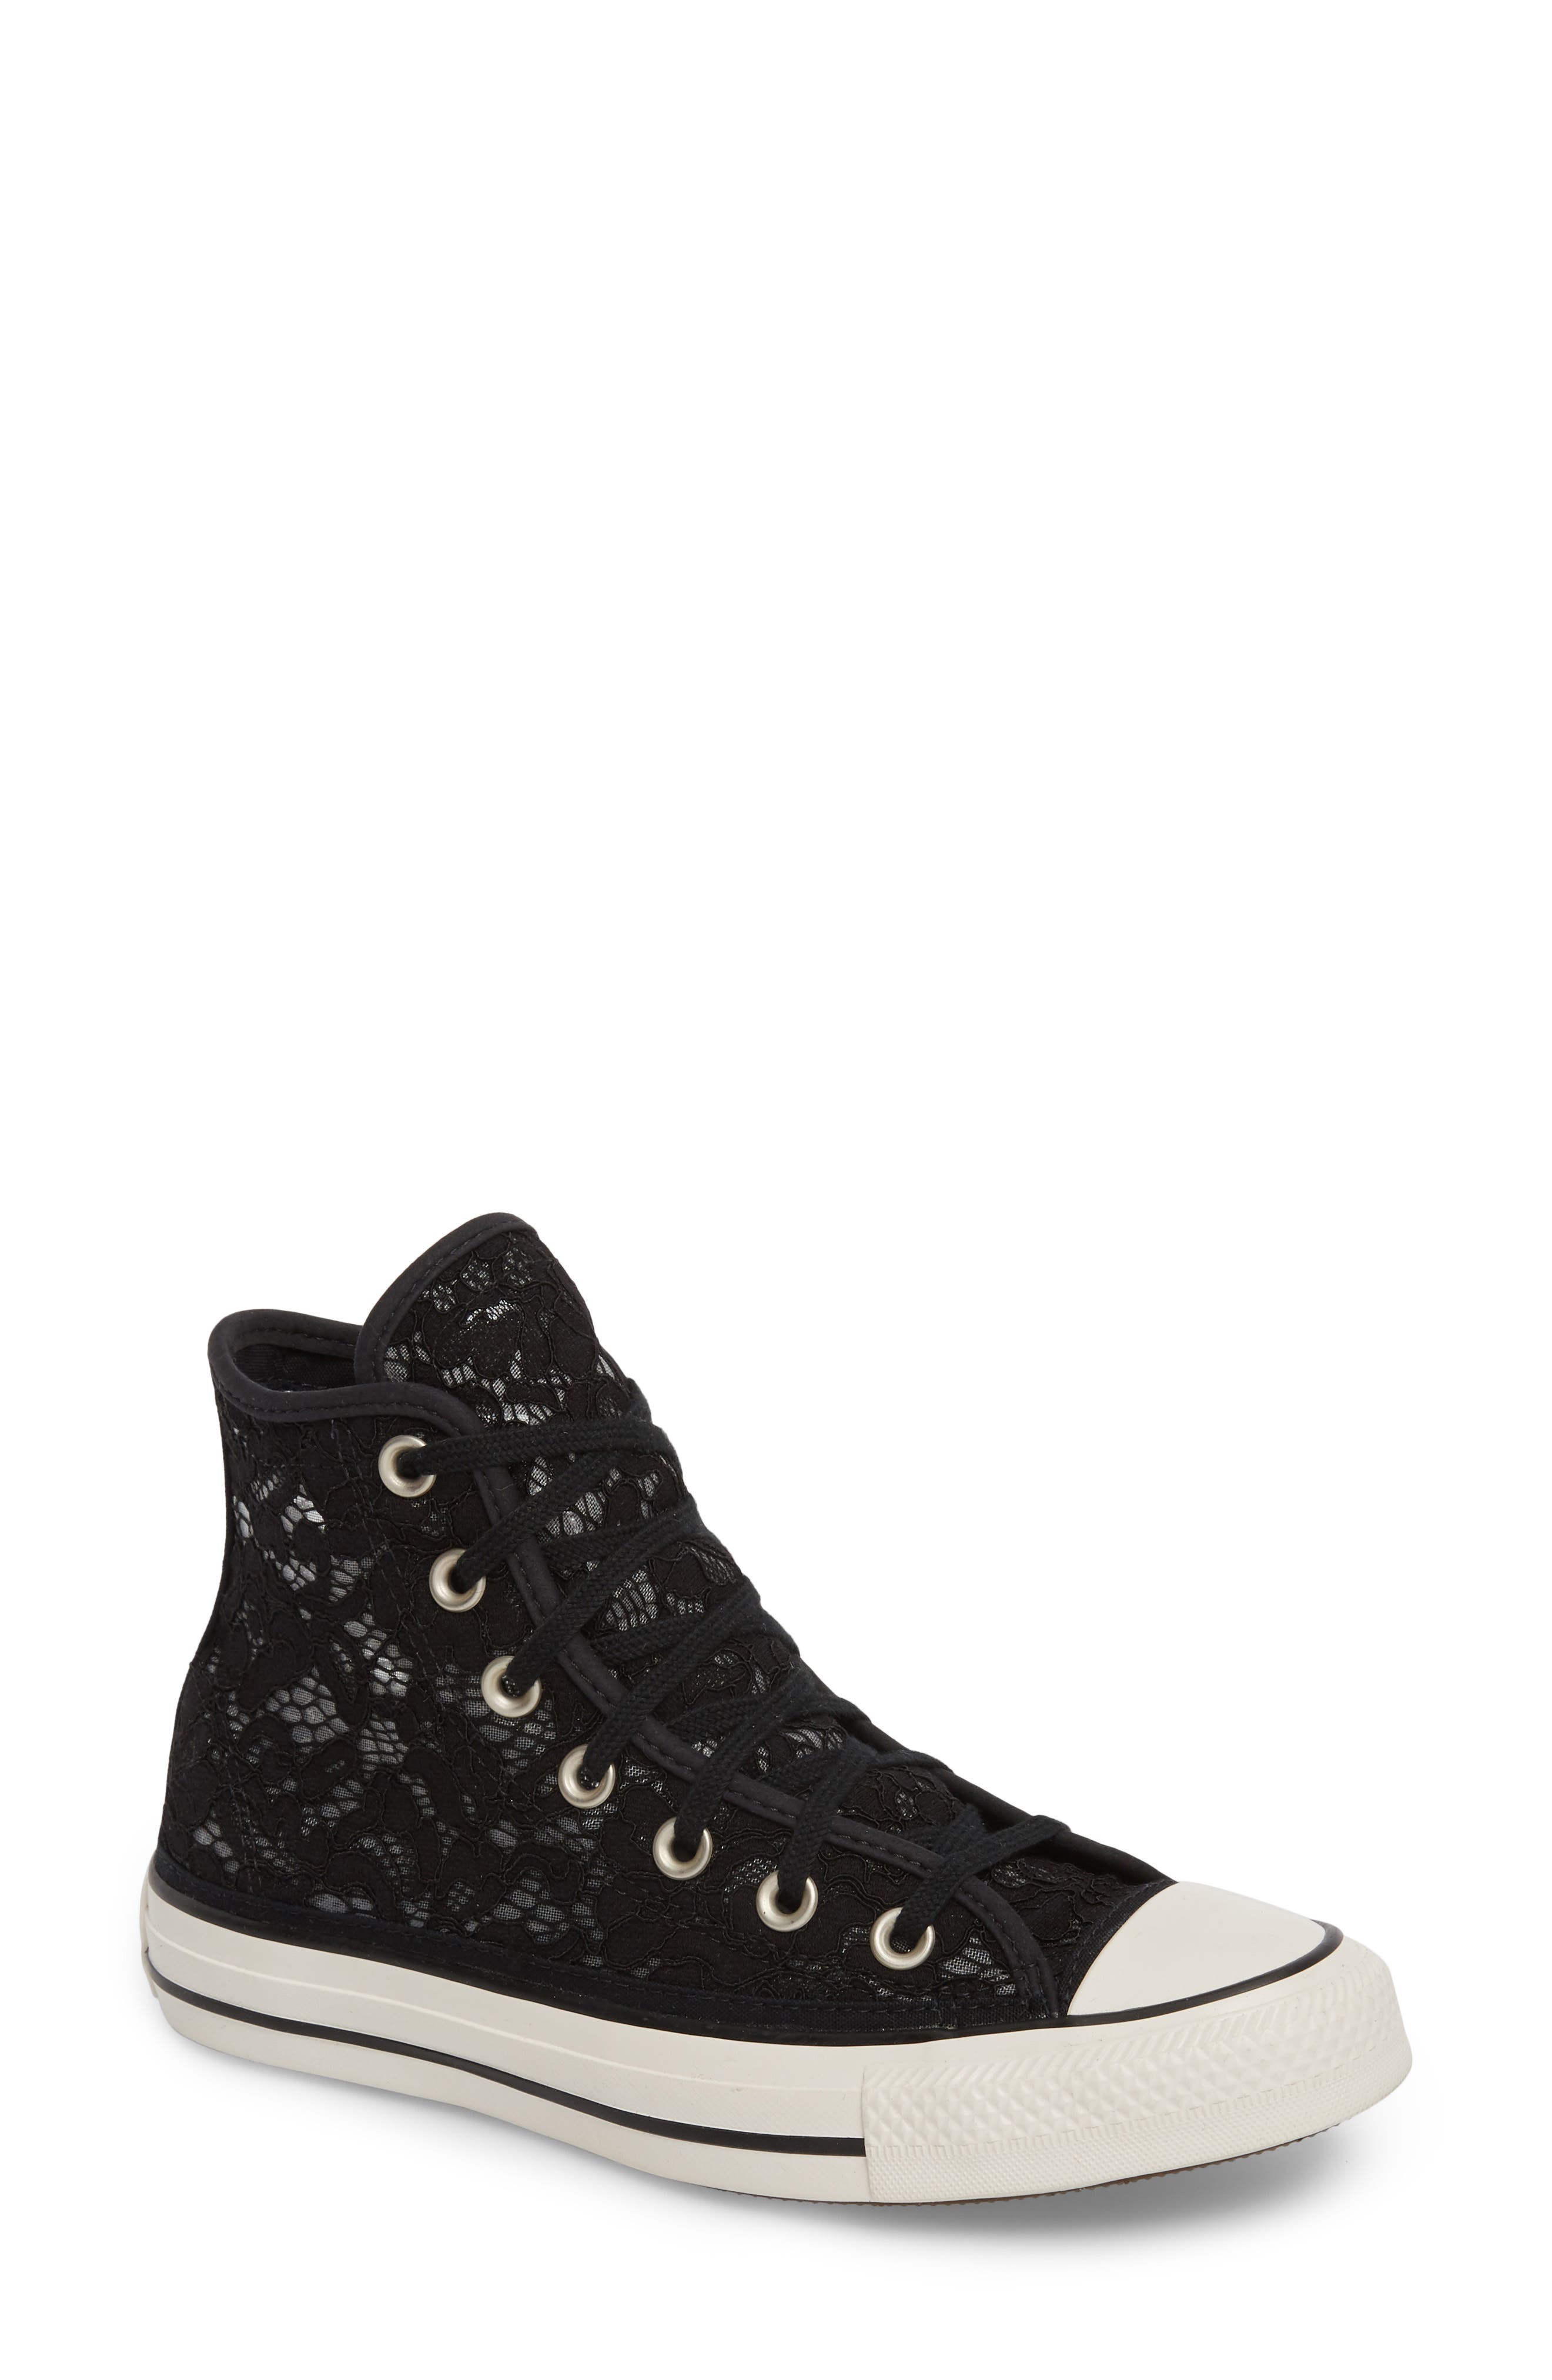 lacey converse high tops